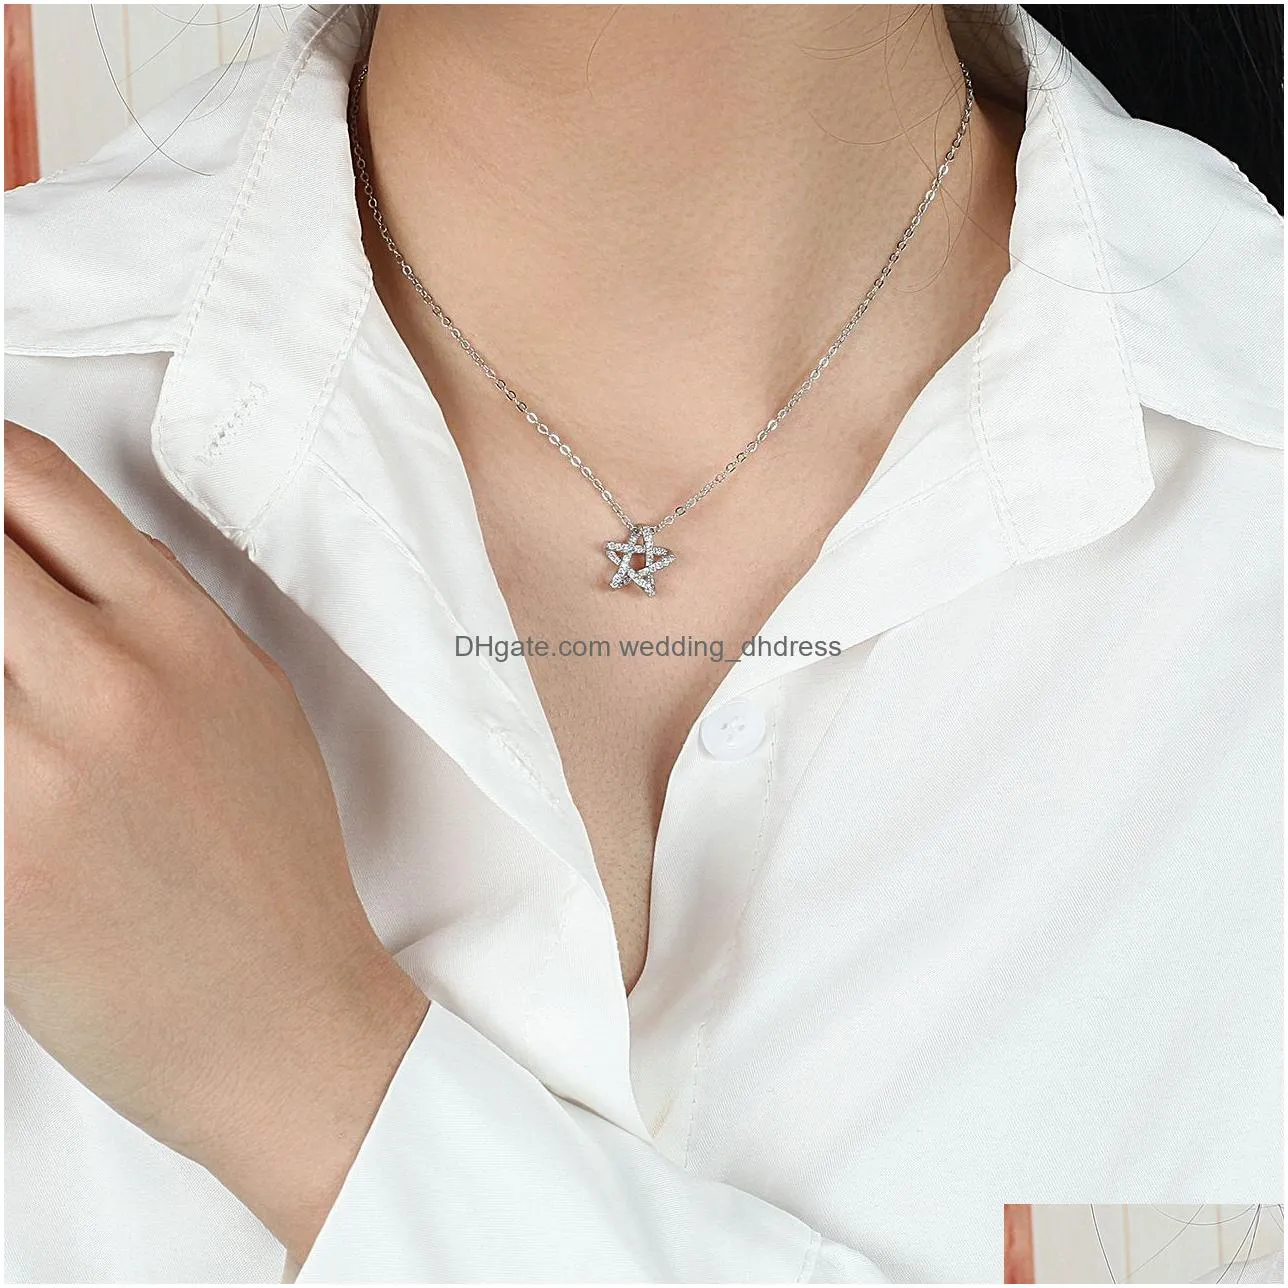 Other Wedding Favors Rhinestone Star Pendant Necklace White Gold Luxury Design Women Party Jewelry For Girl Gift Fashion Choker Neck Dhlak